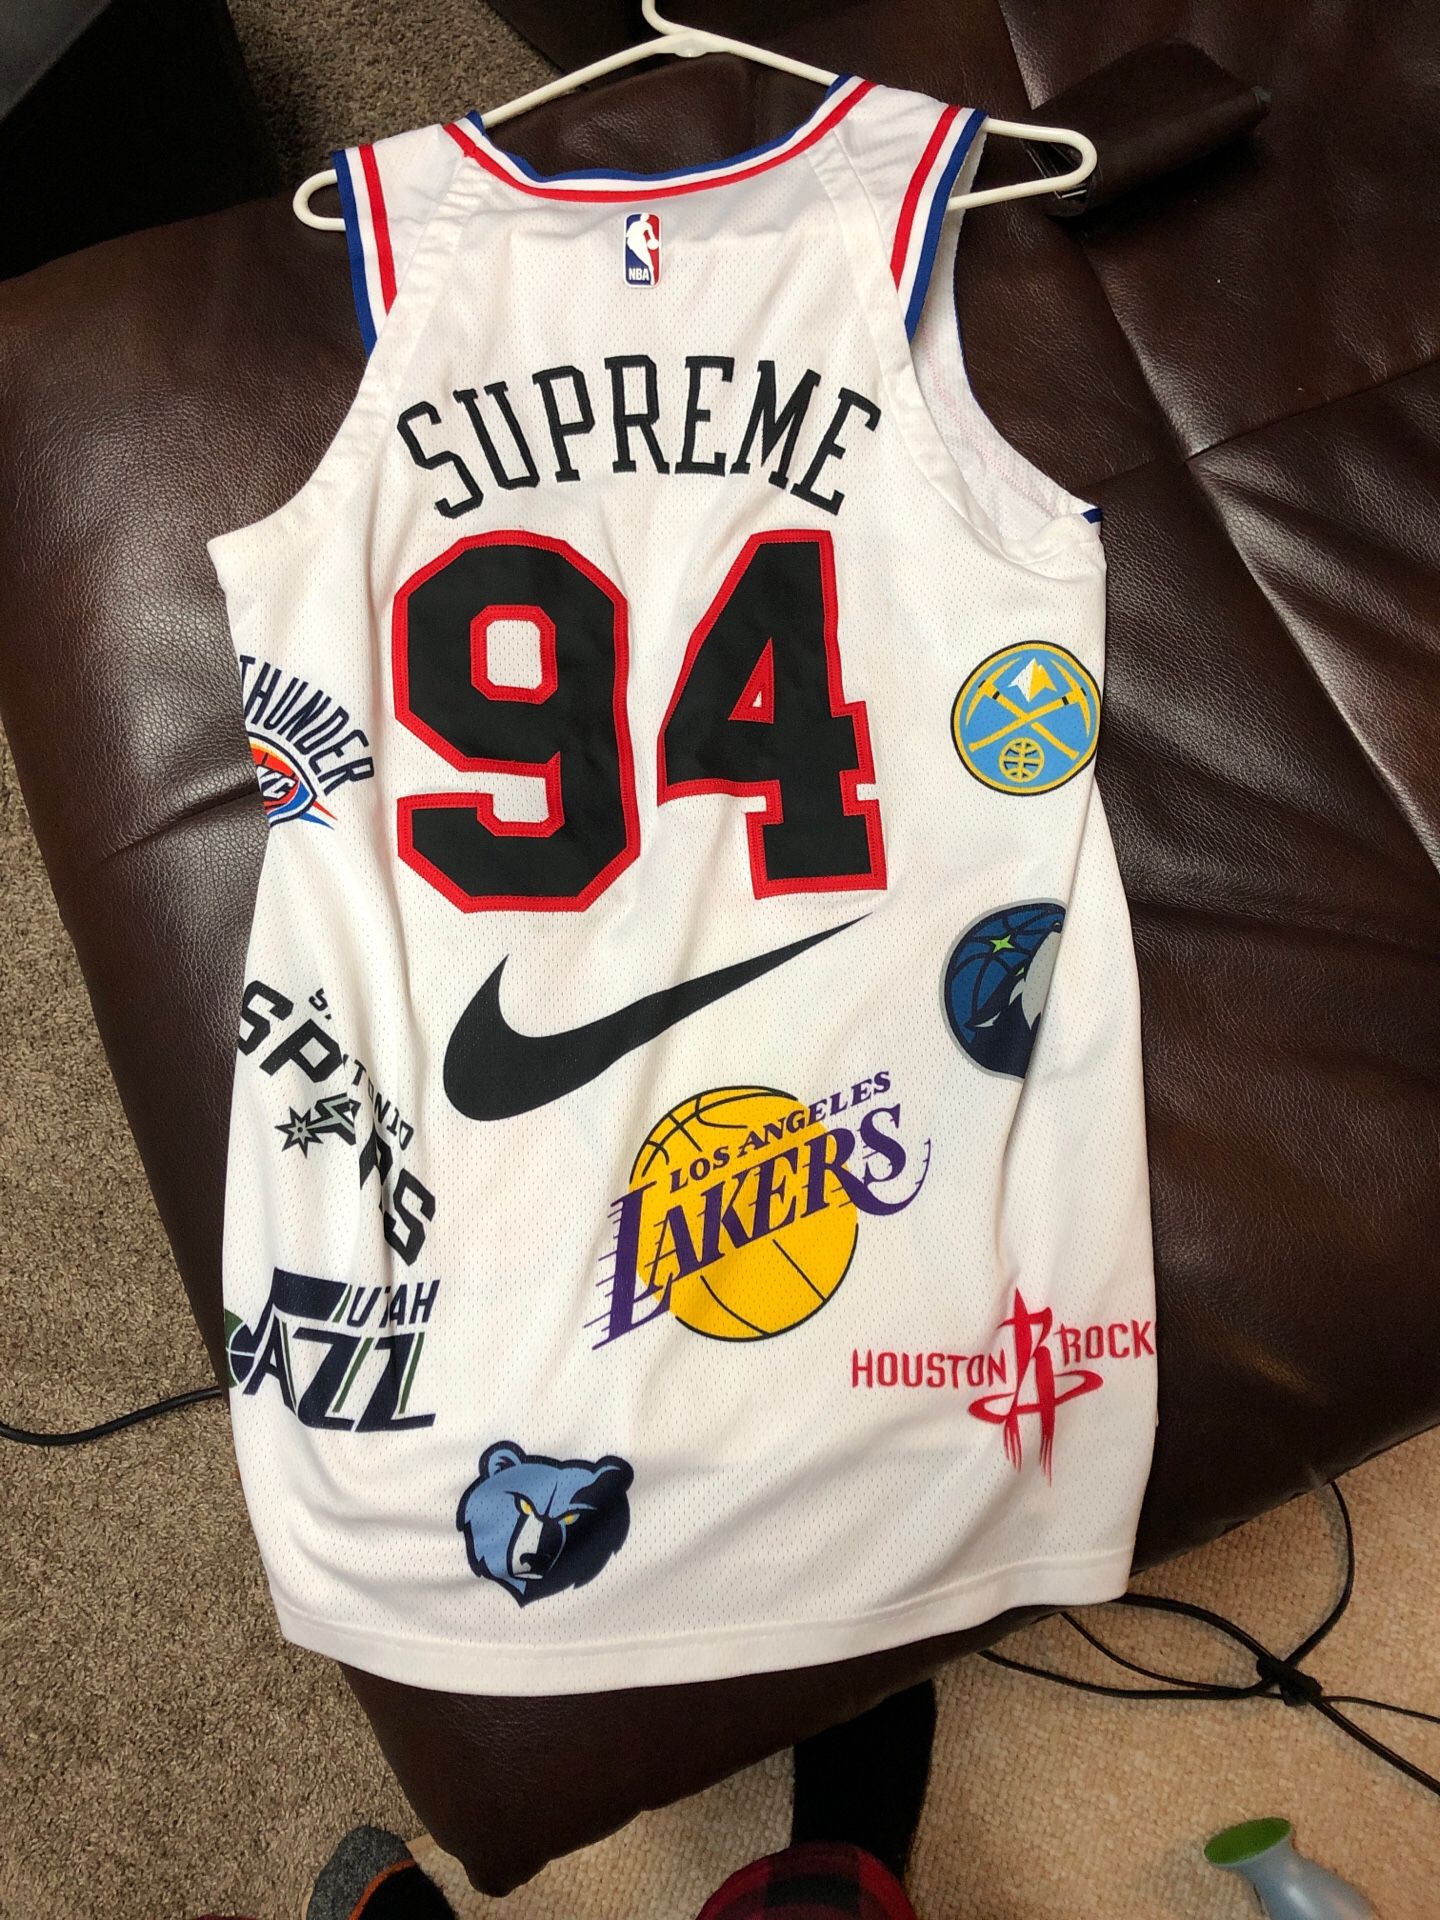 Supreme Nike jersey size medium lowest I can go is 130